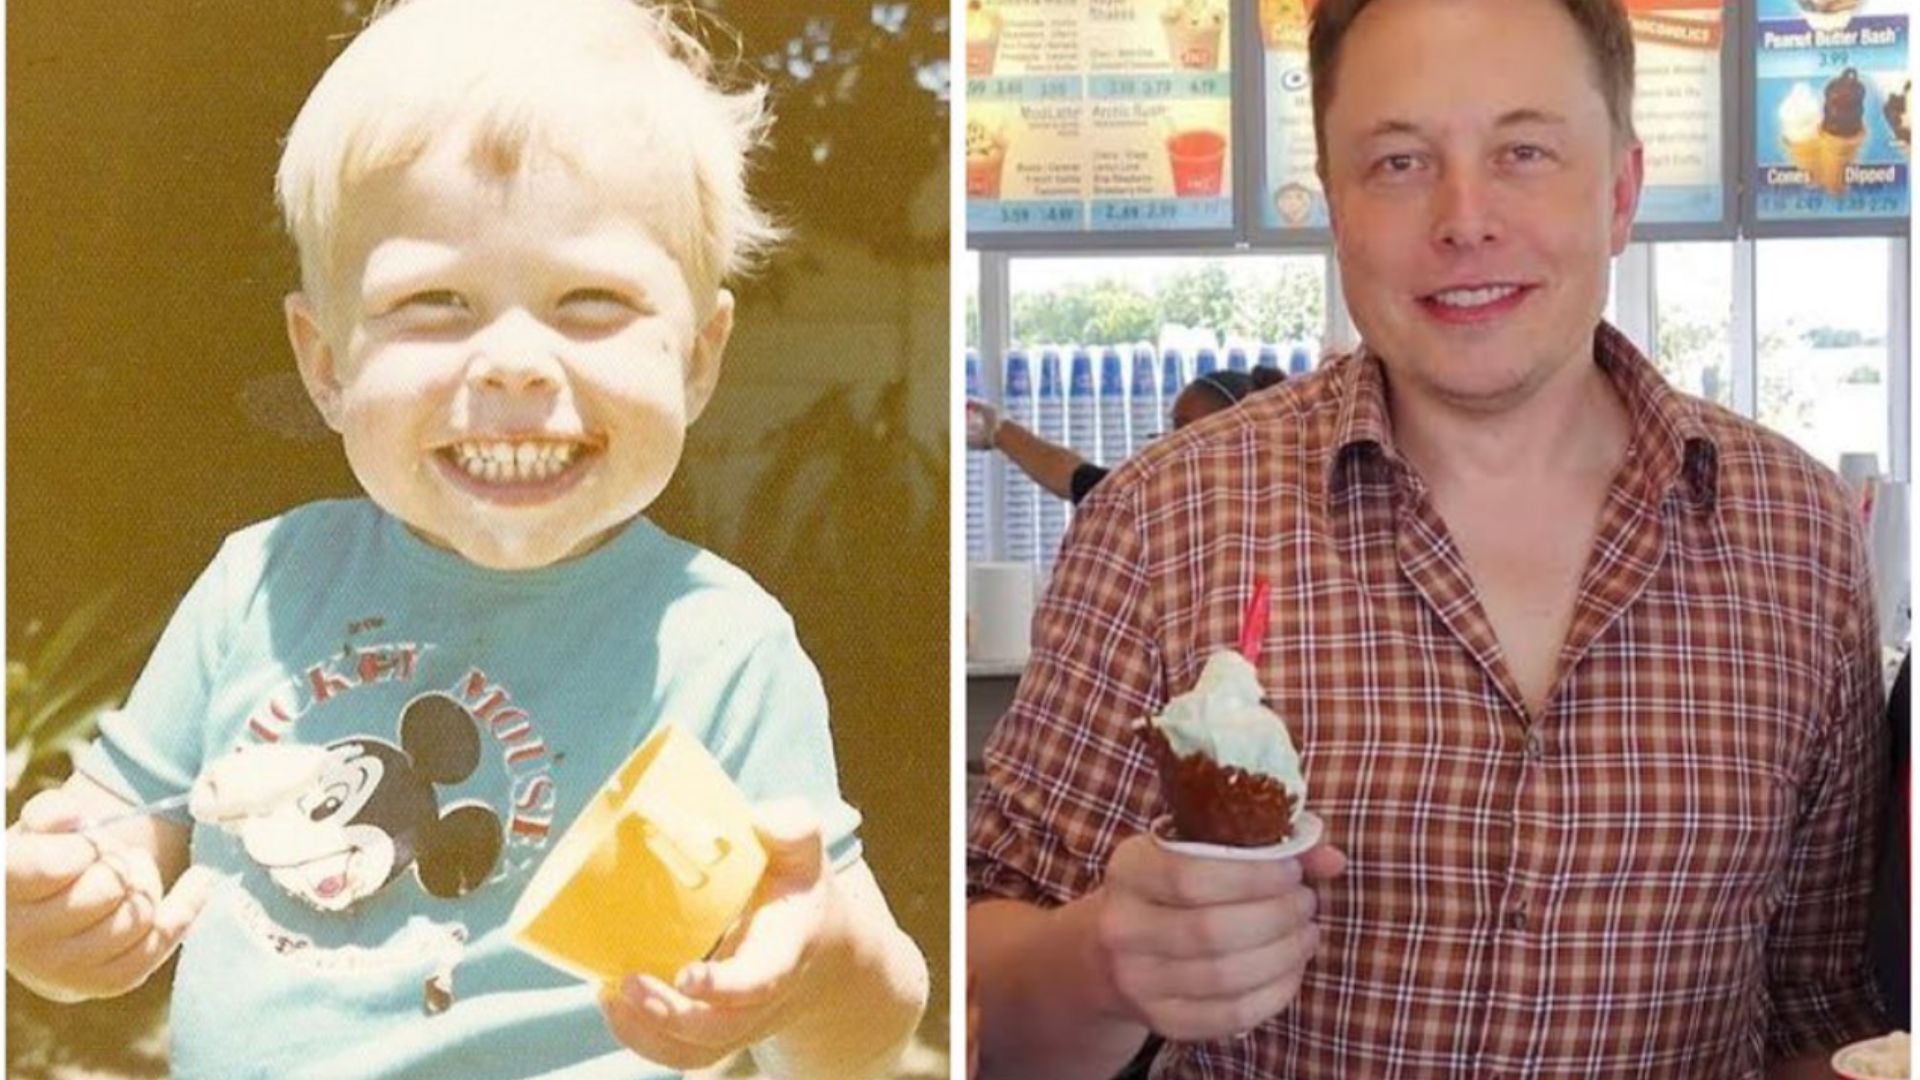 Elon Musk Shares Nostalgic Throwback With Ice Cream In Hand